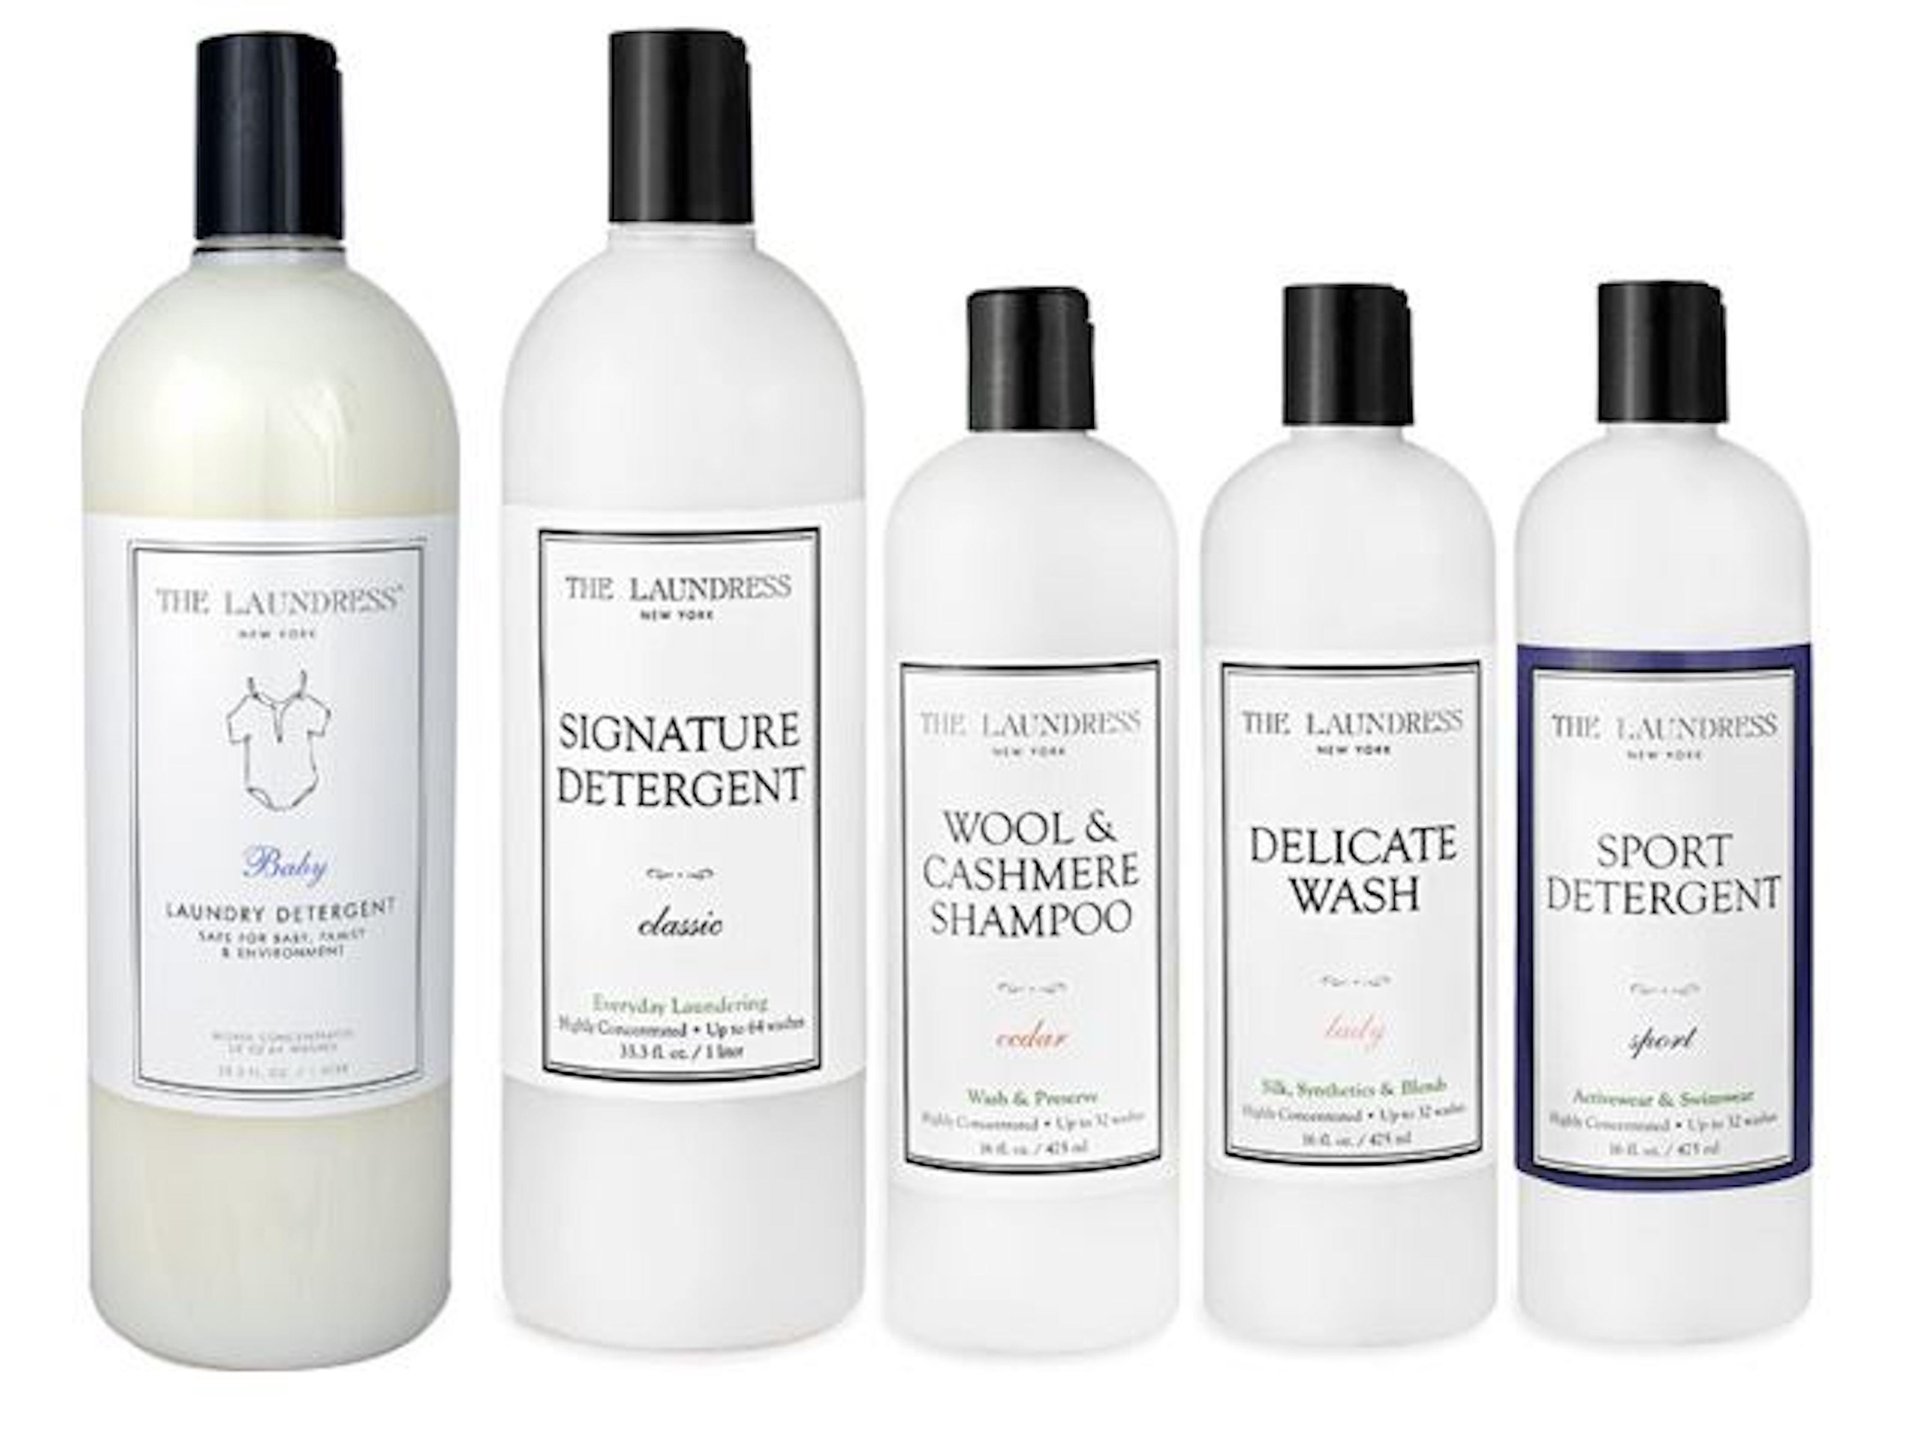 News Picture: Bacteria Risk Spurs Recall of 8 Million Laundress Products